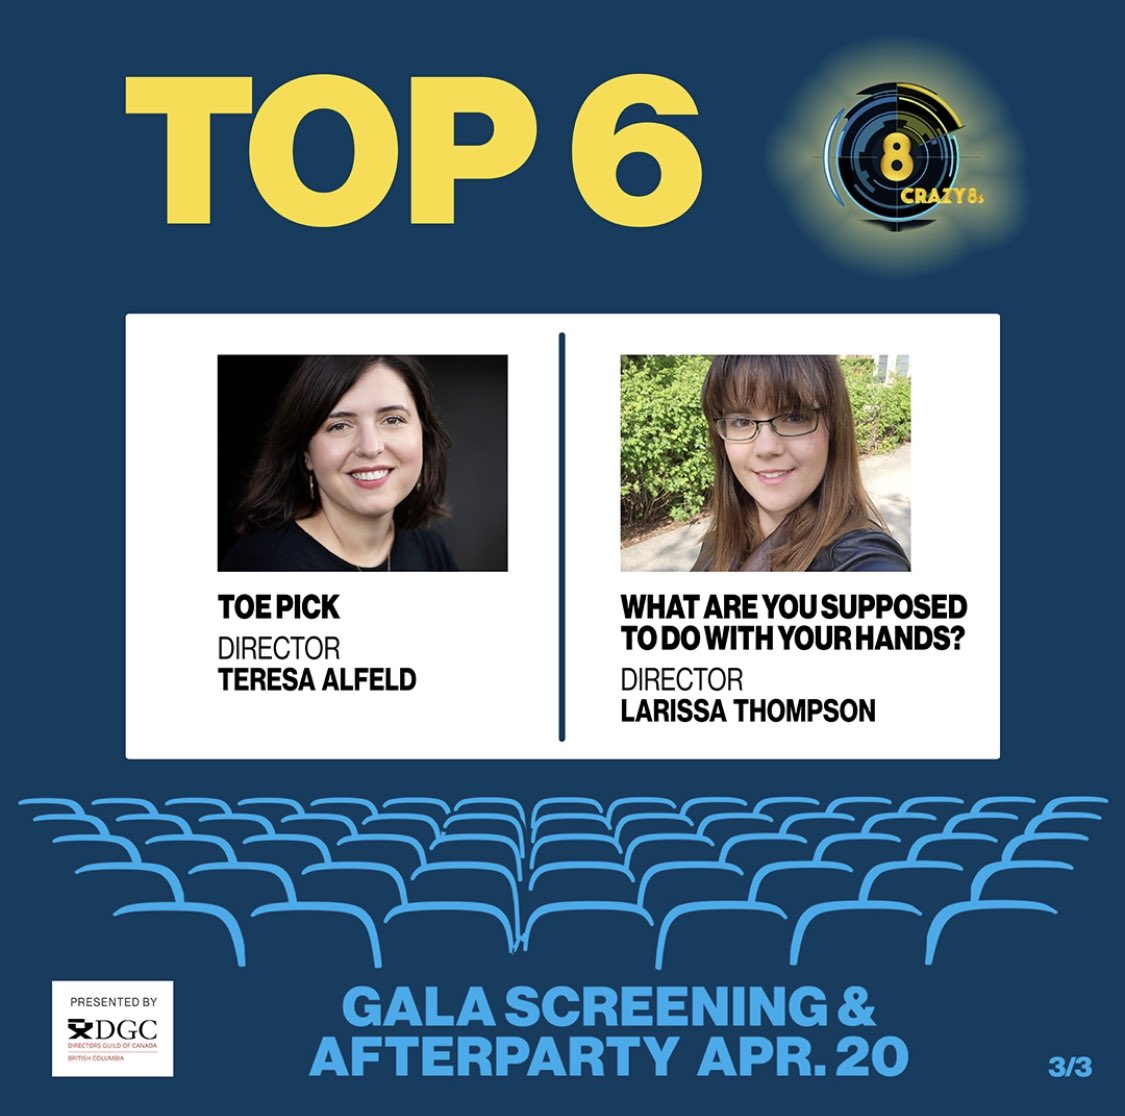 ✨🤩🍿🎱🎬🎟️✨ CRAZY8’s Gala Screening + Afterparty! TODAY in Vancouver! Celebrating 25 years! Gather with the BC film industry and see incredible films by stunning film talent! @DGCBC @Telefilm_Canada @UBCP_ACTRA Get your tix here! crazy8s.film #Crazy8sfilms24